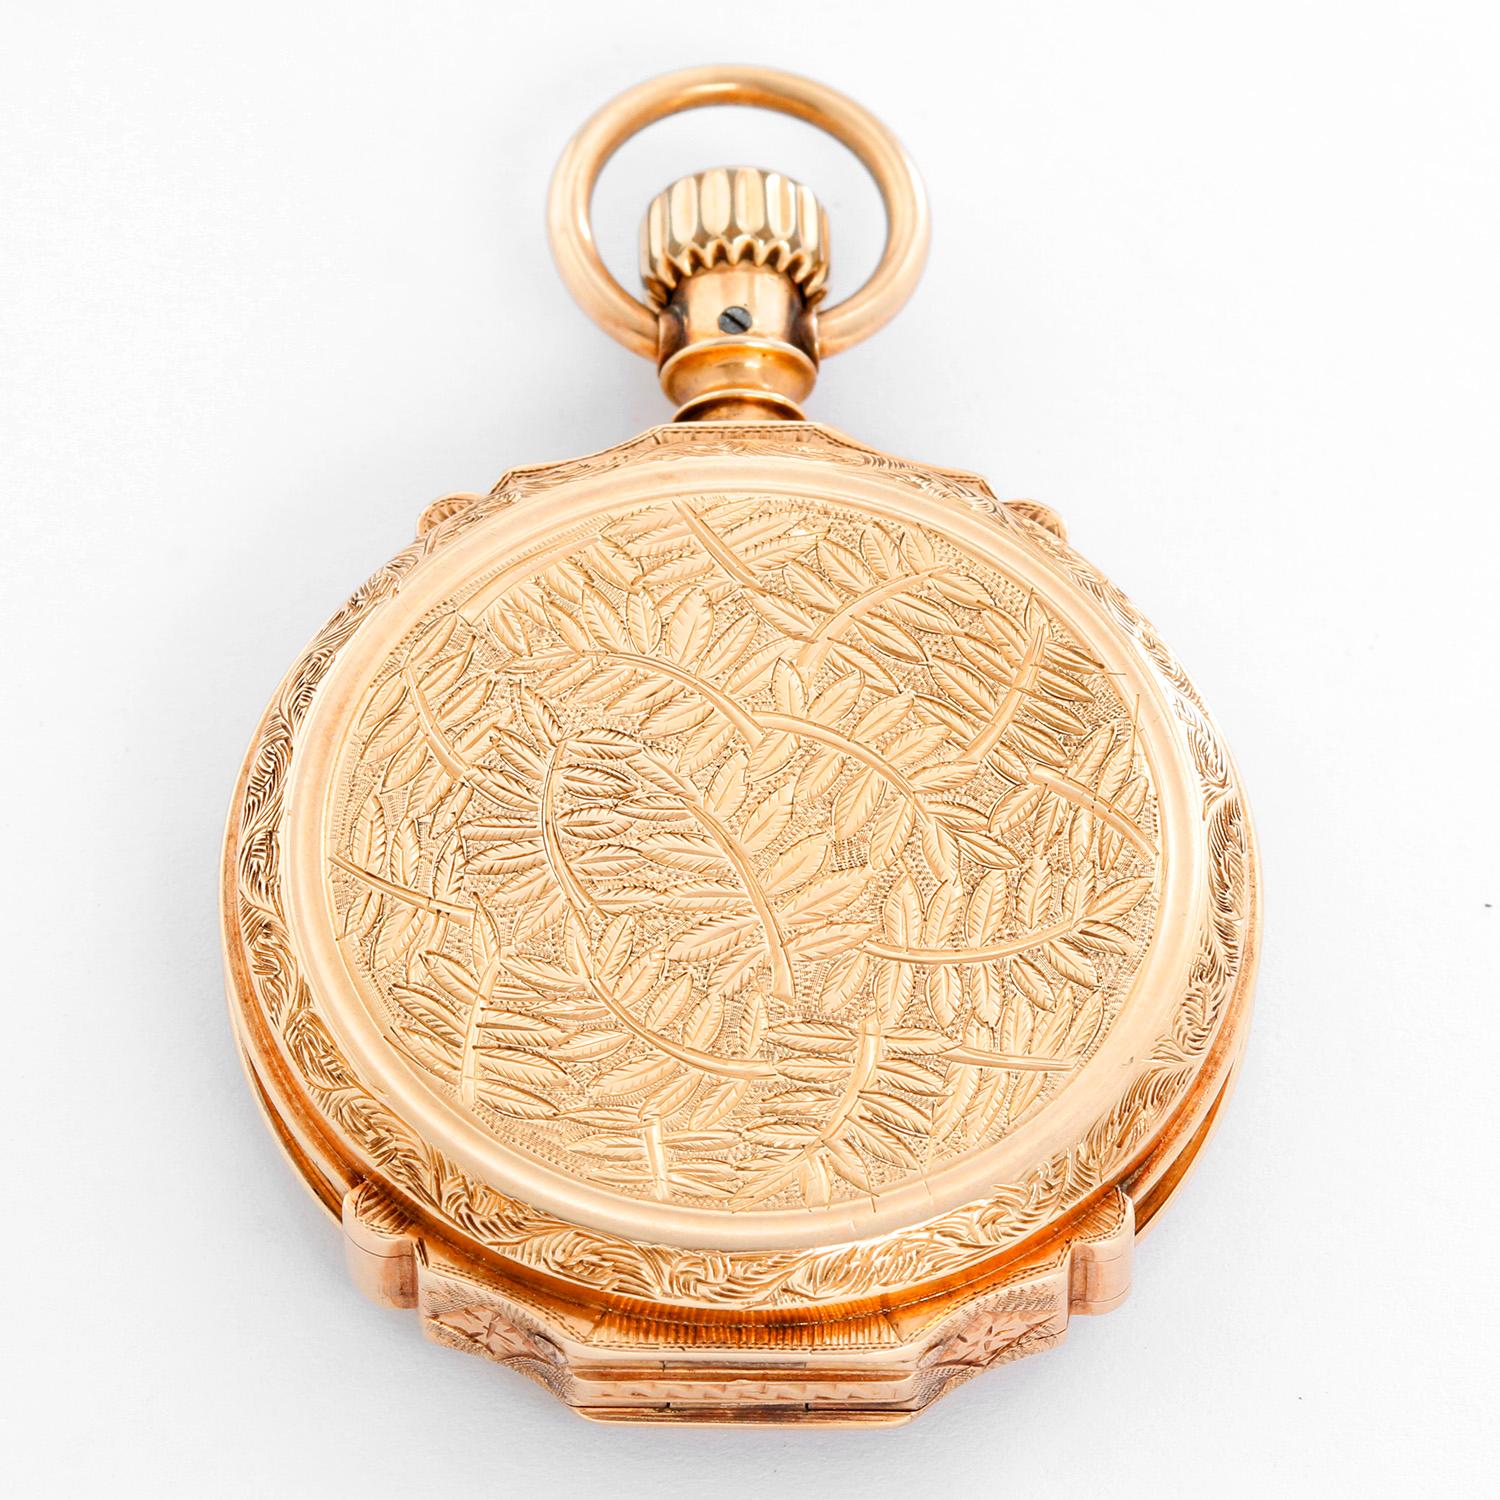 Elgin 14K Yellow Gold Hinge Pocket Watch - Manual winding. 14K Yellow gold ( 43 mm) with ornate engraving on borth front and back . White dial with Roman numerals; subsecond dial at 6 o'clock. Pre-owned with custom box. 
Please note that this watch